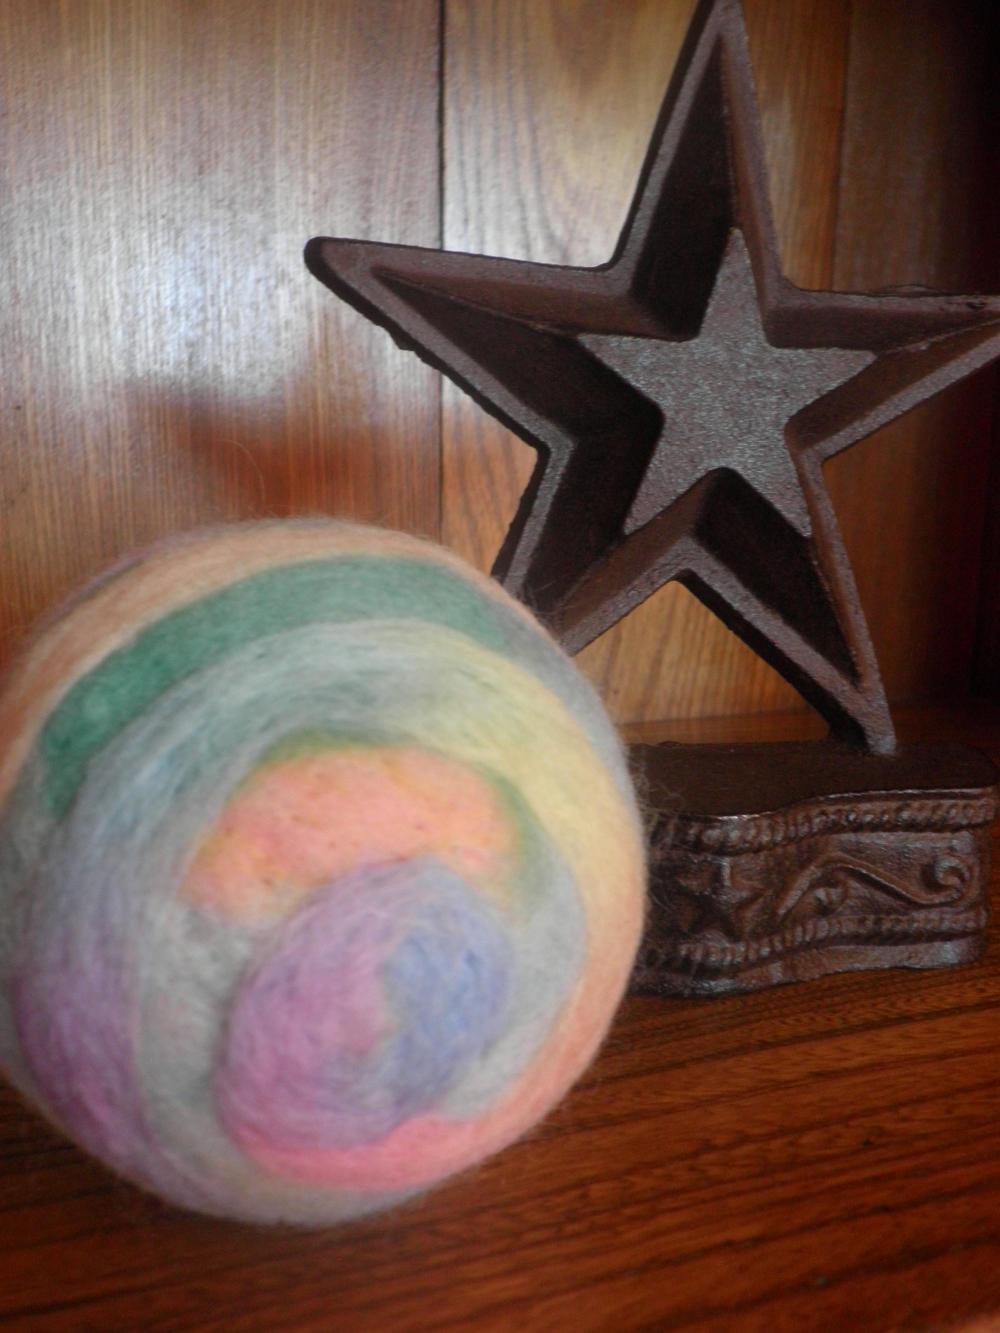 Wool Art Ball For Baby. Calming Baby Toy, Lavender Filled, Jingle Bells Sound. Medium Sized. Eco Friendly, Natural Toy. Baby First Birthday.